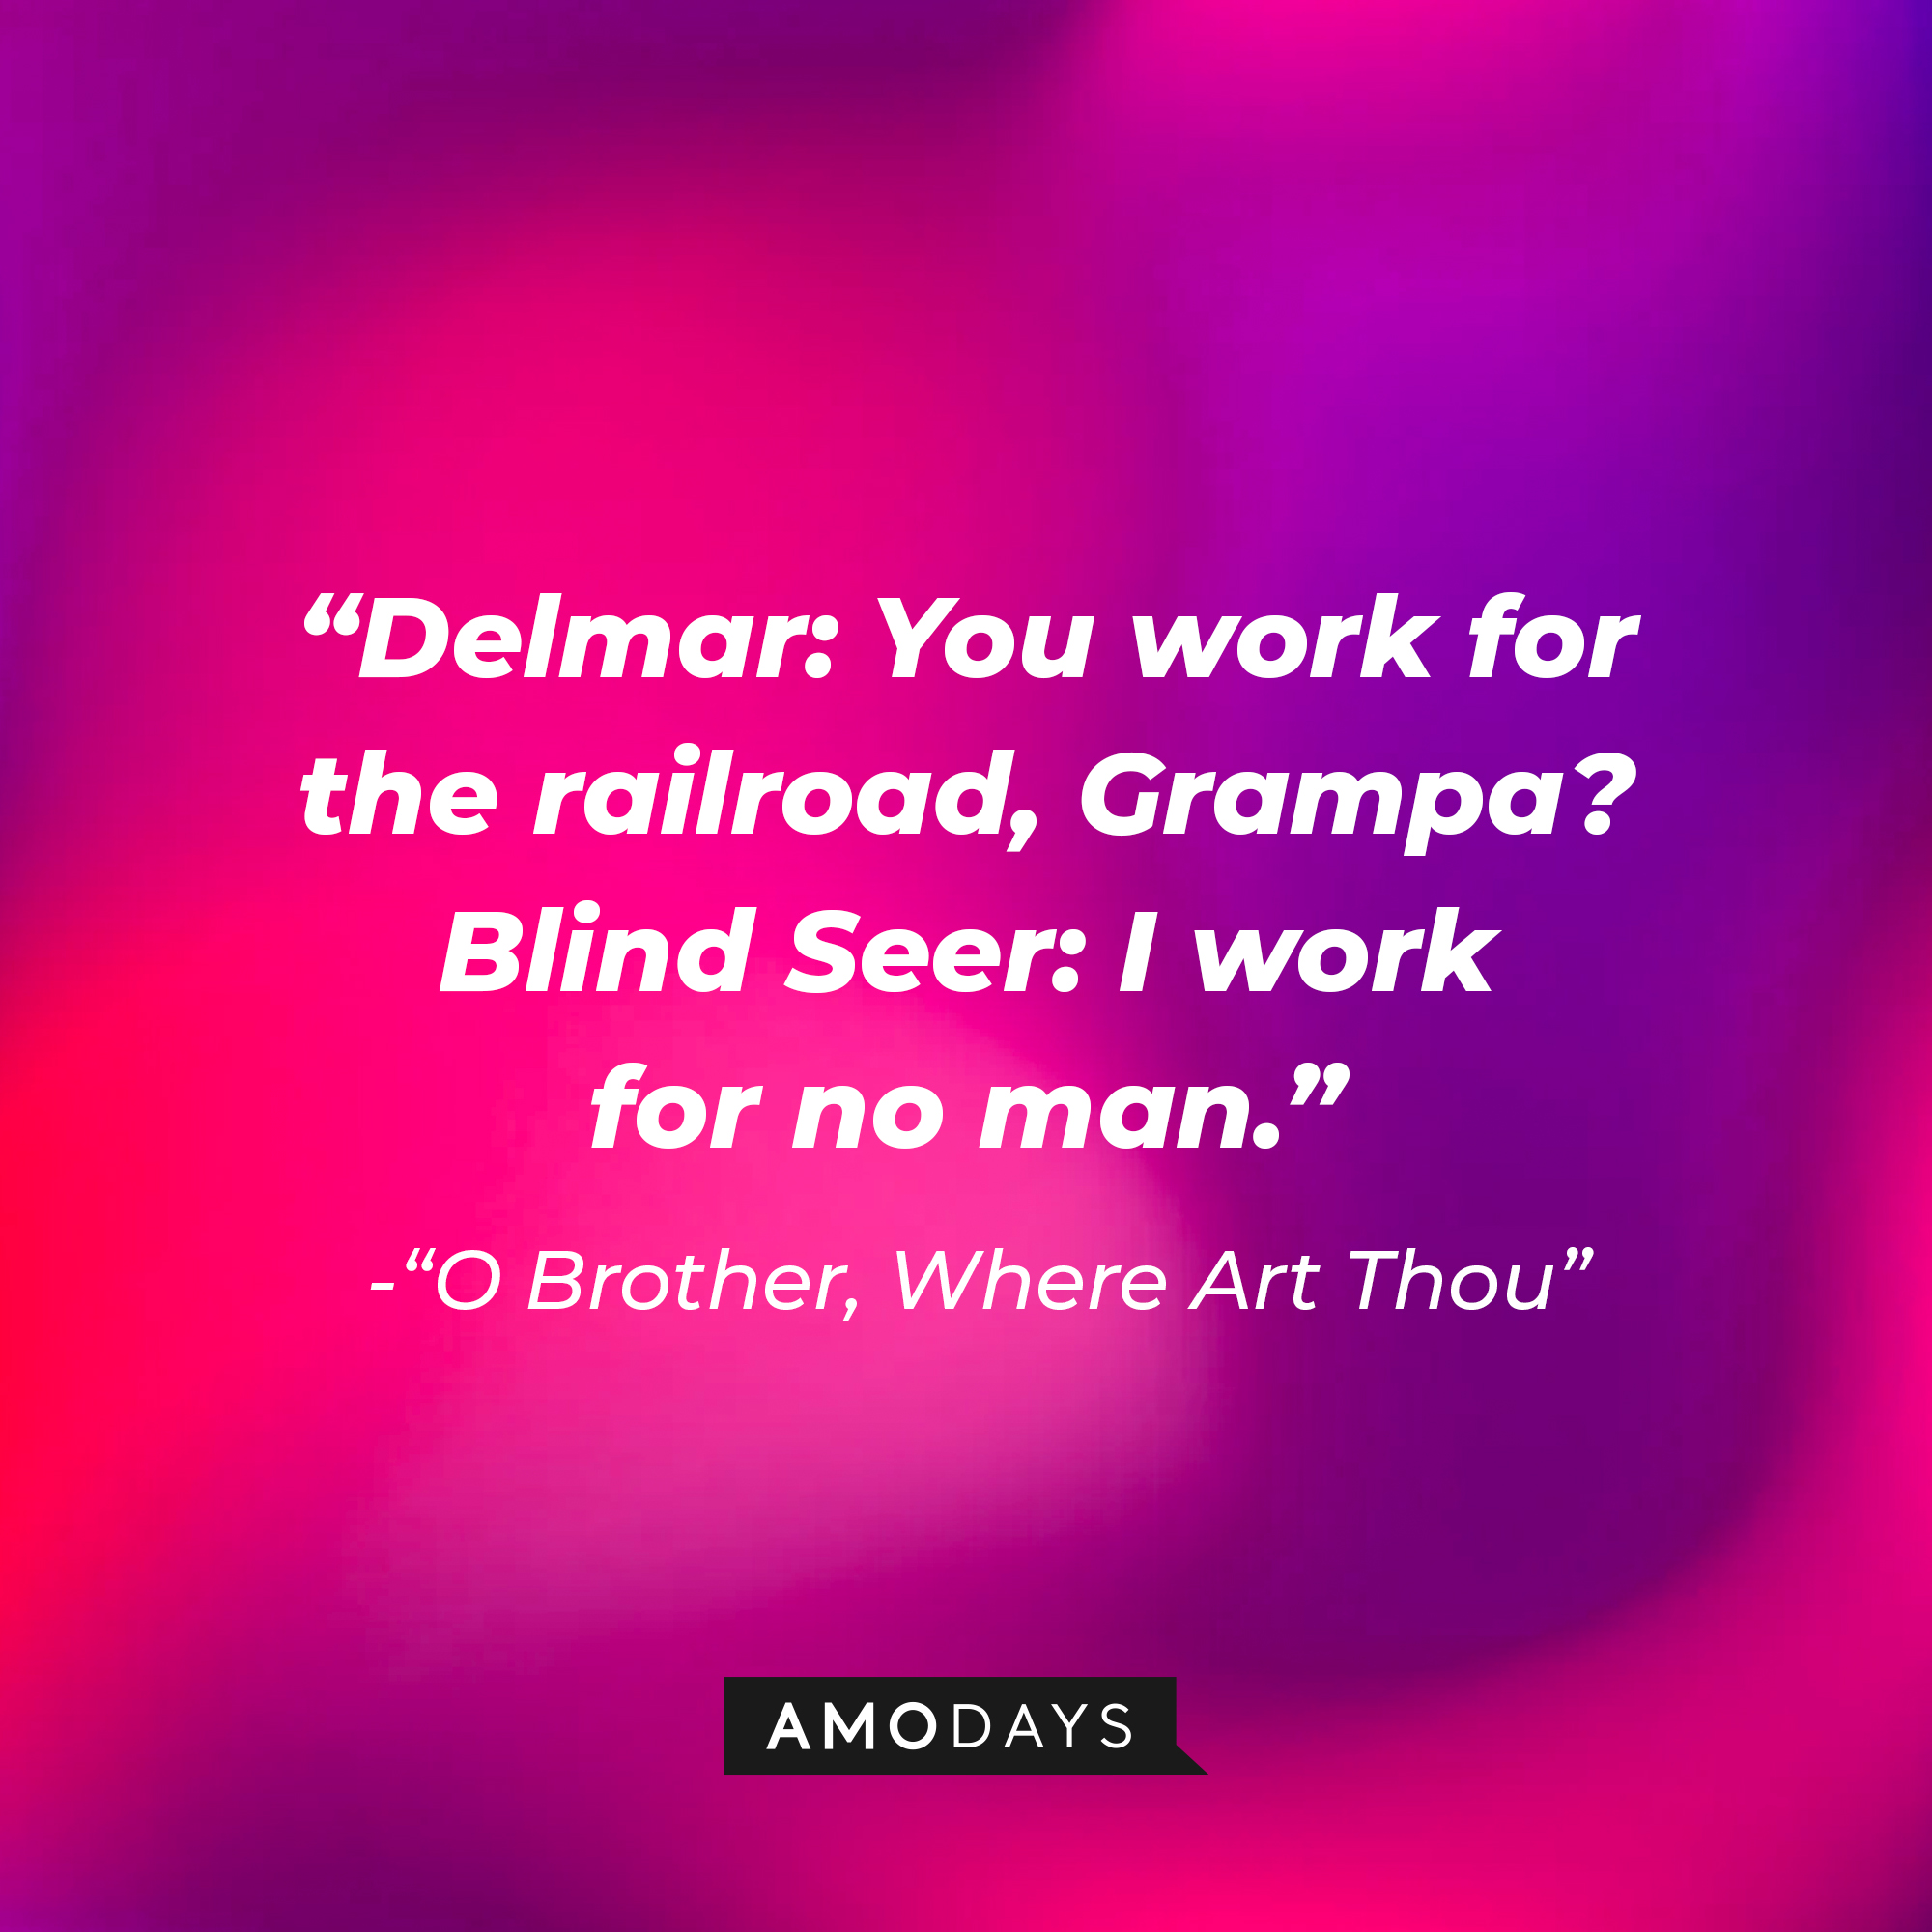 Pete Hogwallop's dialogue in "O Brother, Where Art Thou:" "Delmar: You work for the railroad, Grampa? ; Blind Seer: I work for no man." | Source: AmoDays